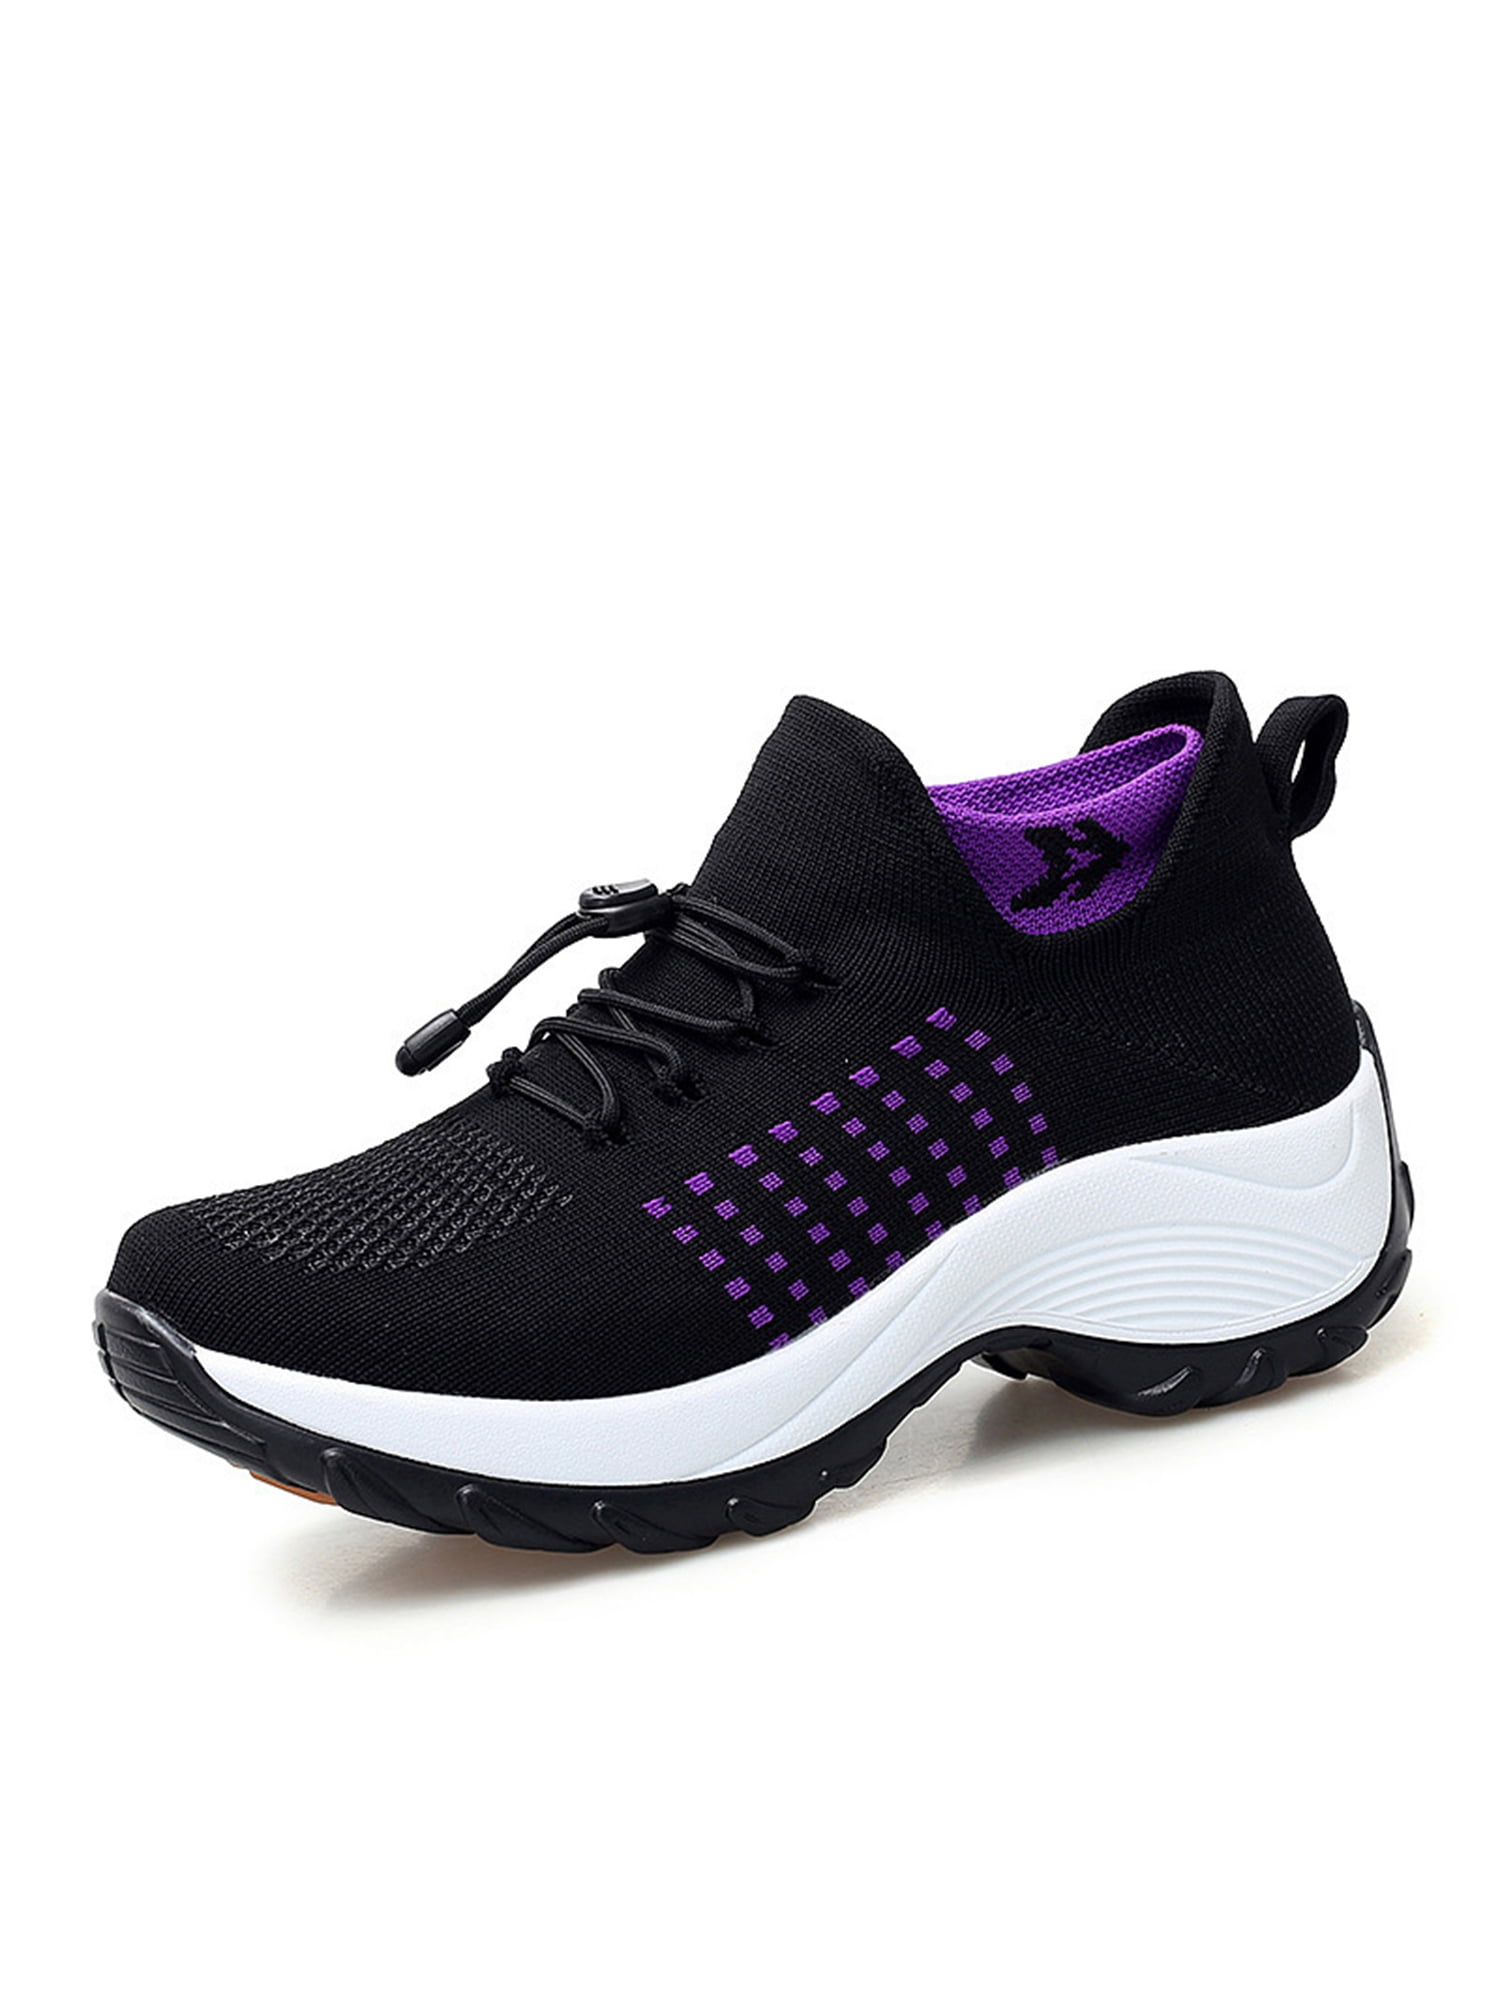 Campus Shoes - Buy Latest Campus Shoes Online in India | Myntra